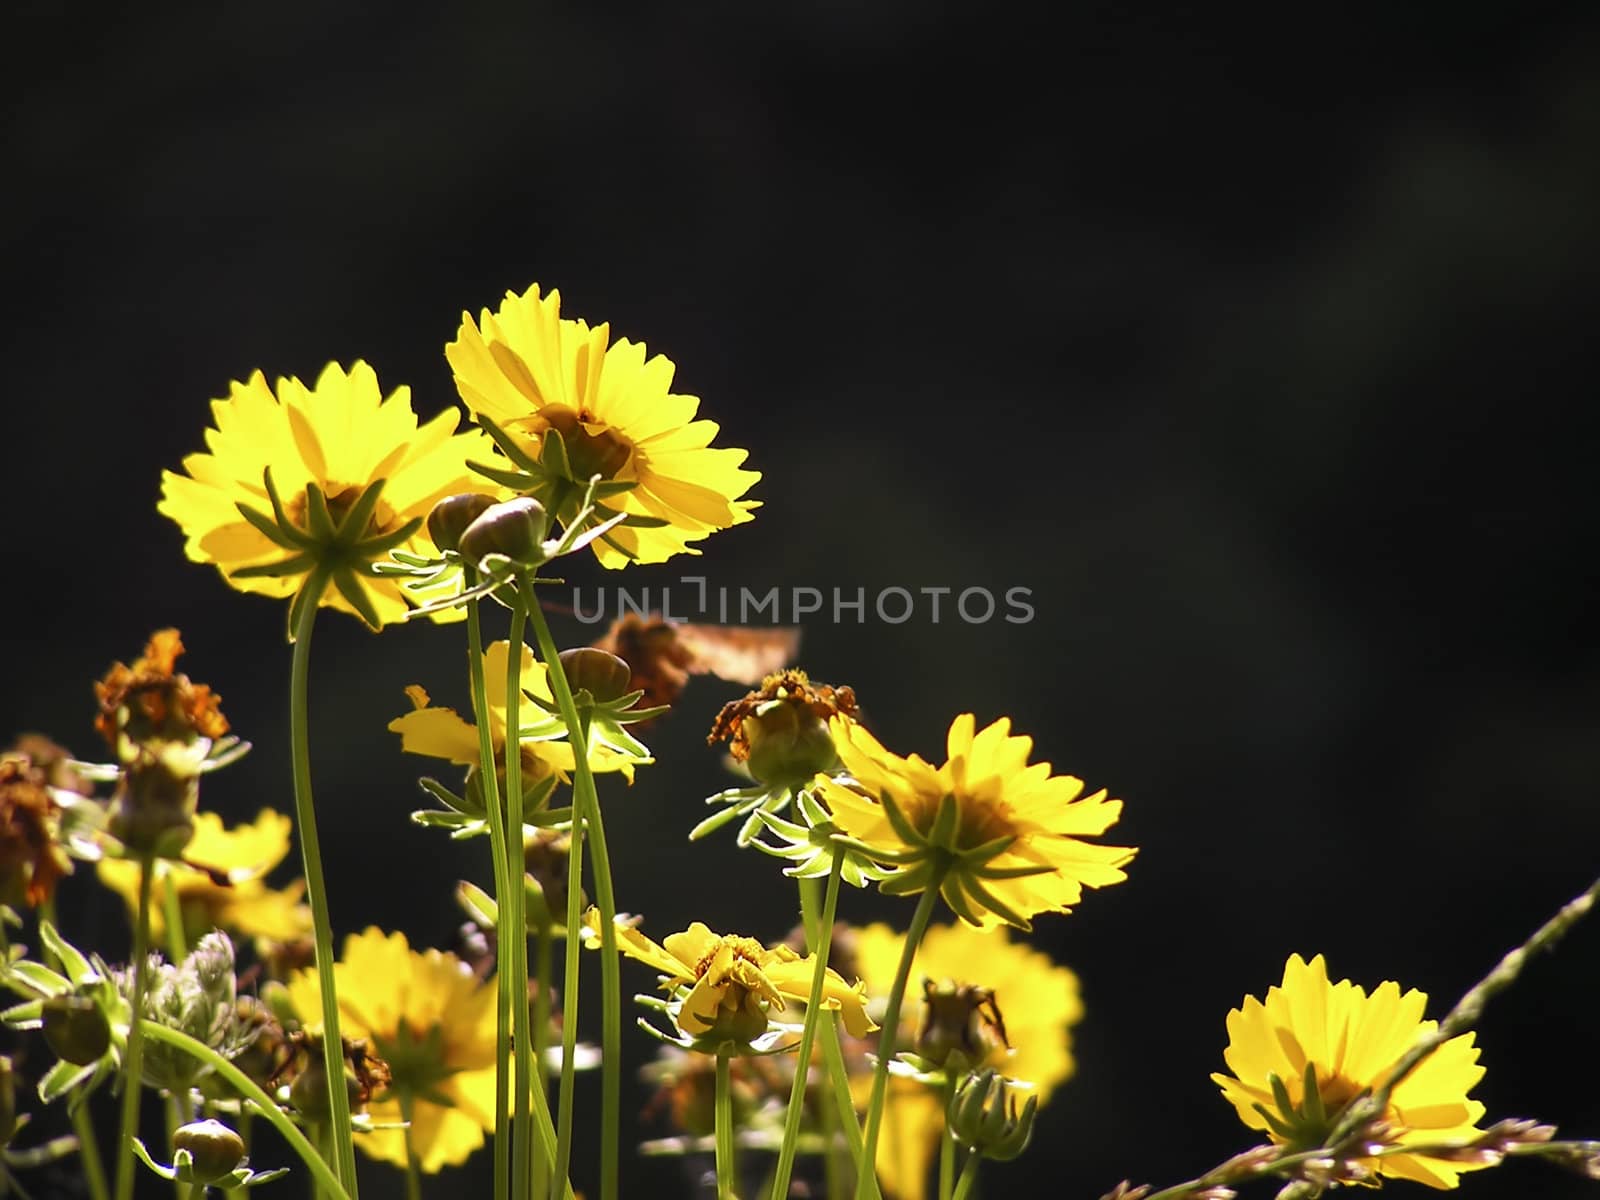 A few yellow flowers with green pettels against dark background.